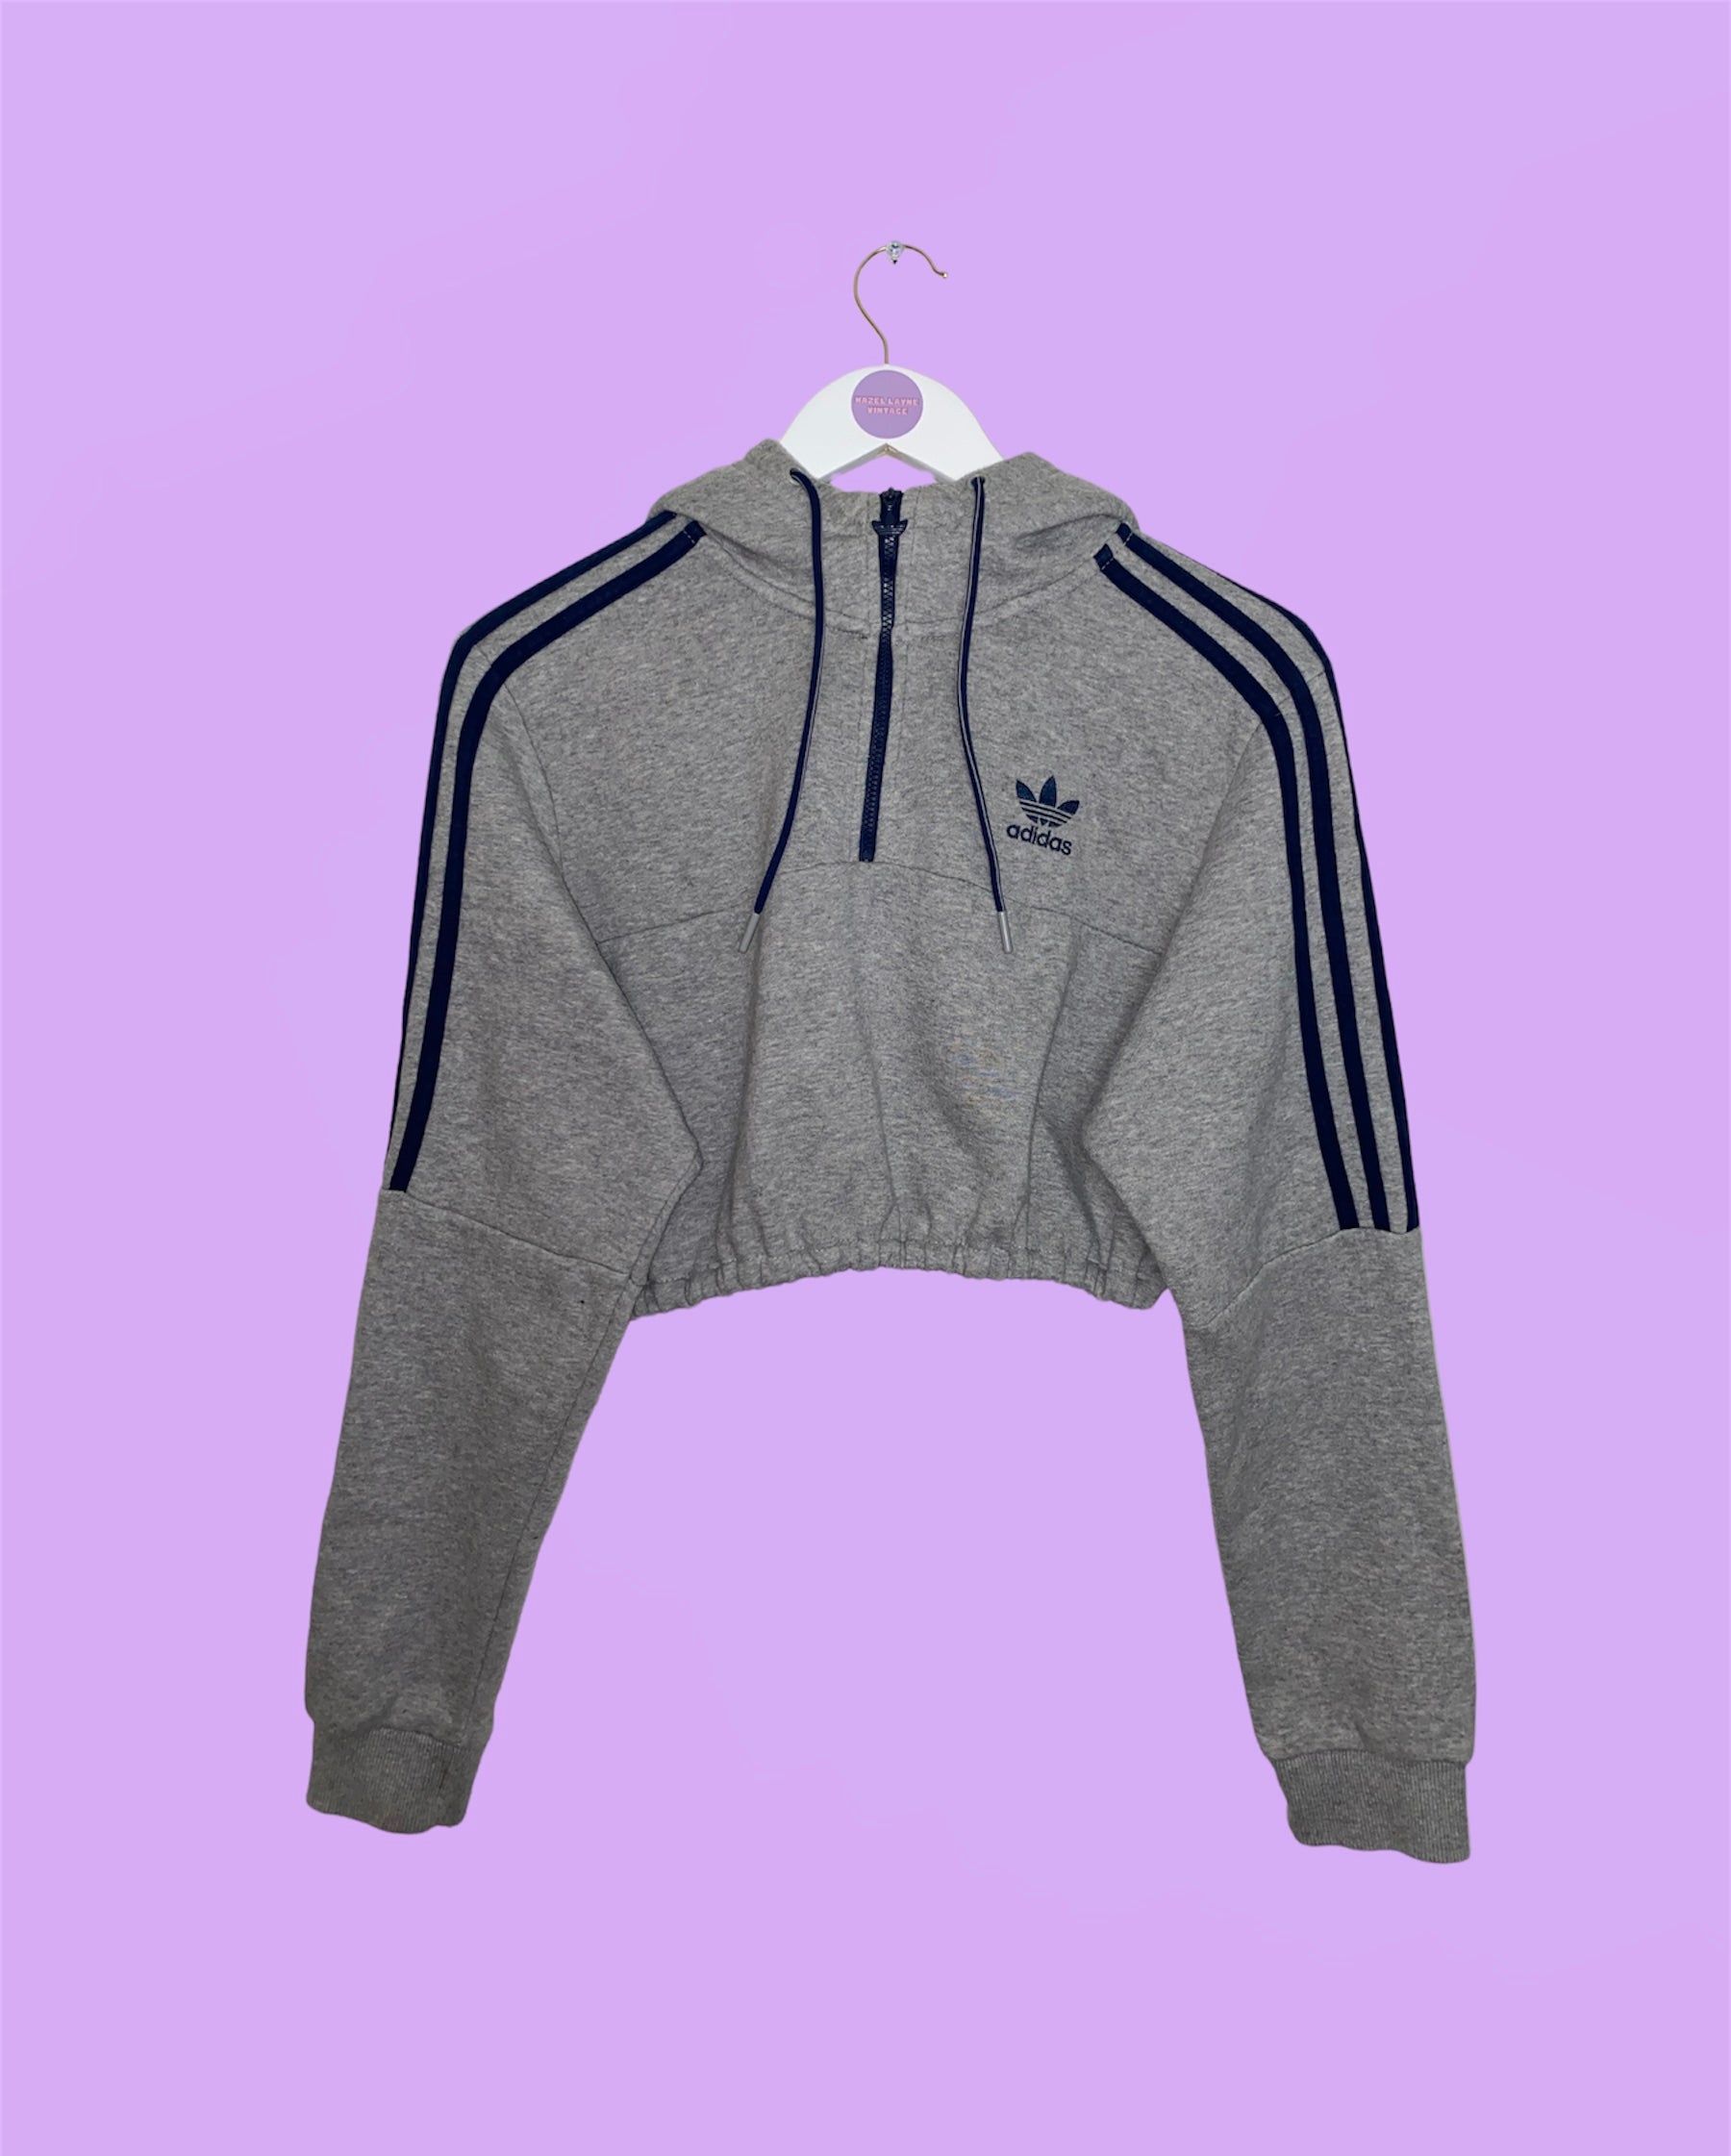 grey 1/4 zip cropped hoodie with navy adidas logo shown on a white clothes hanger on a lilac background